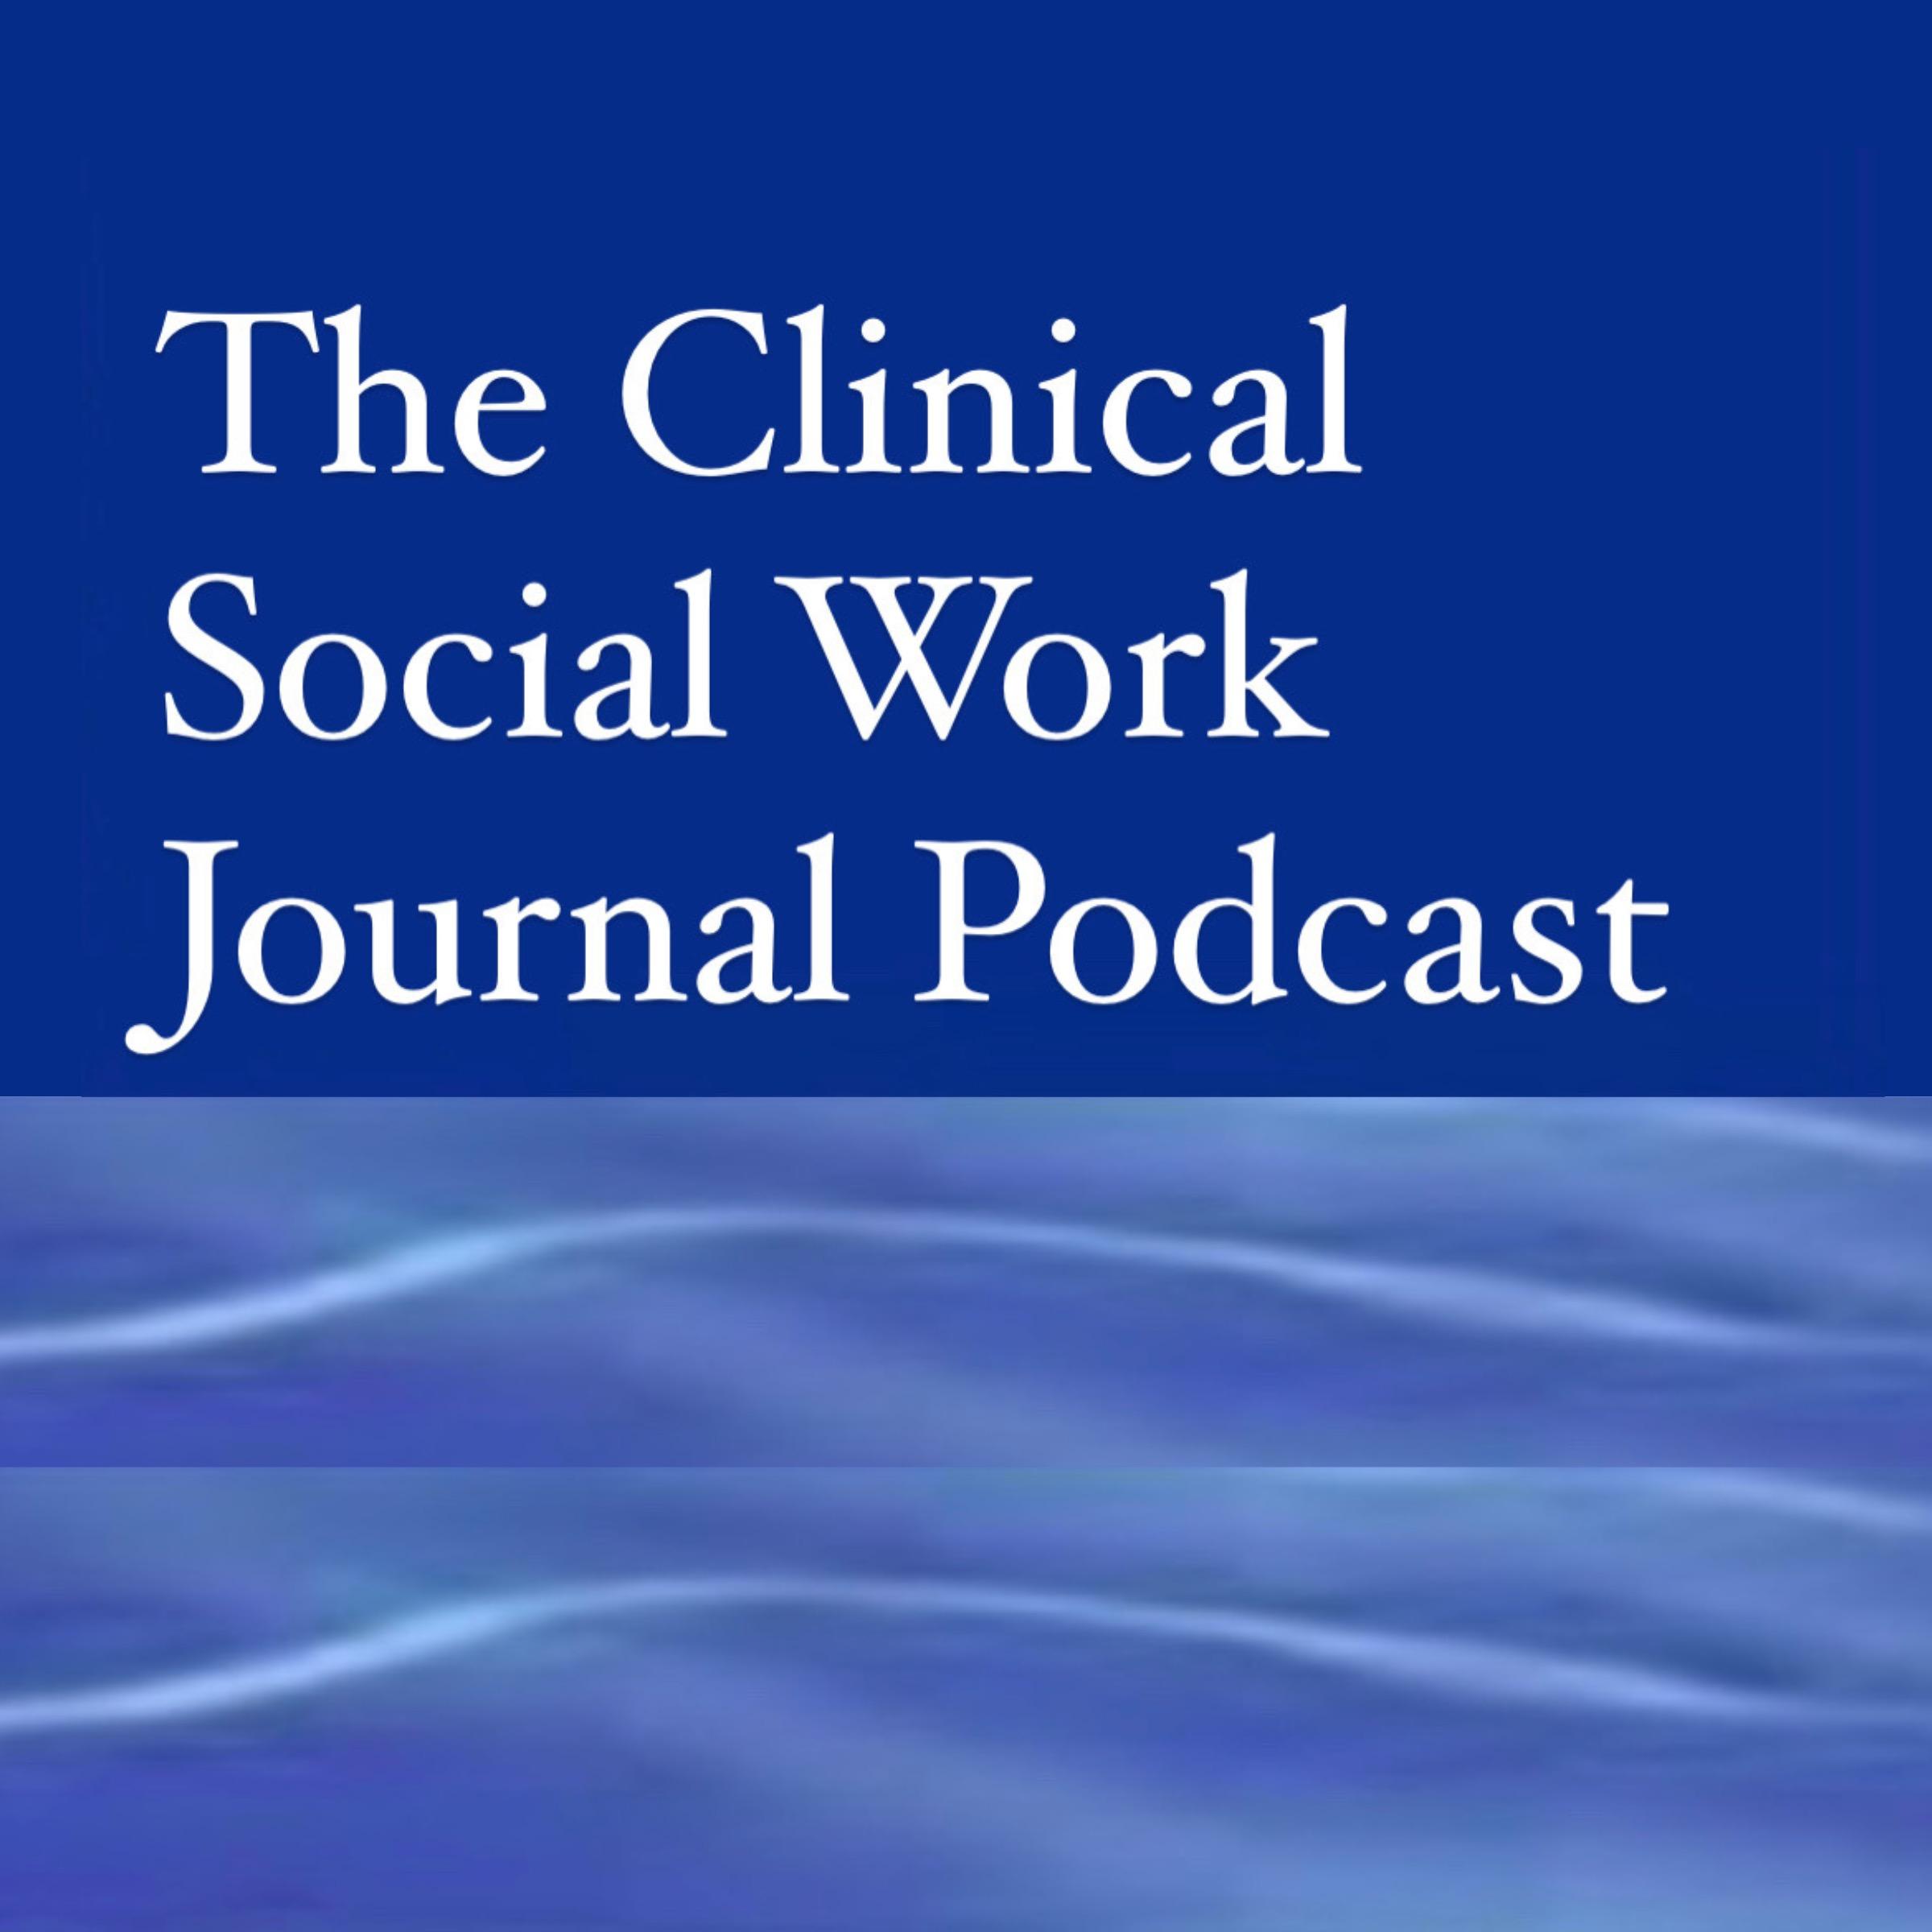 The Clinical Social Work Journal Podcast